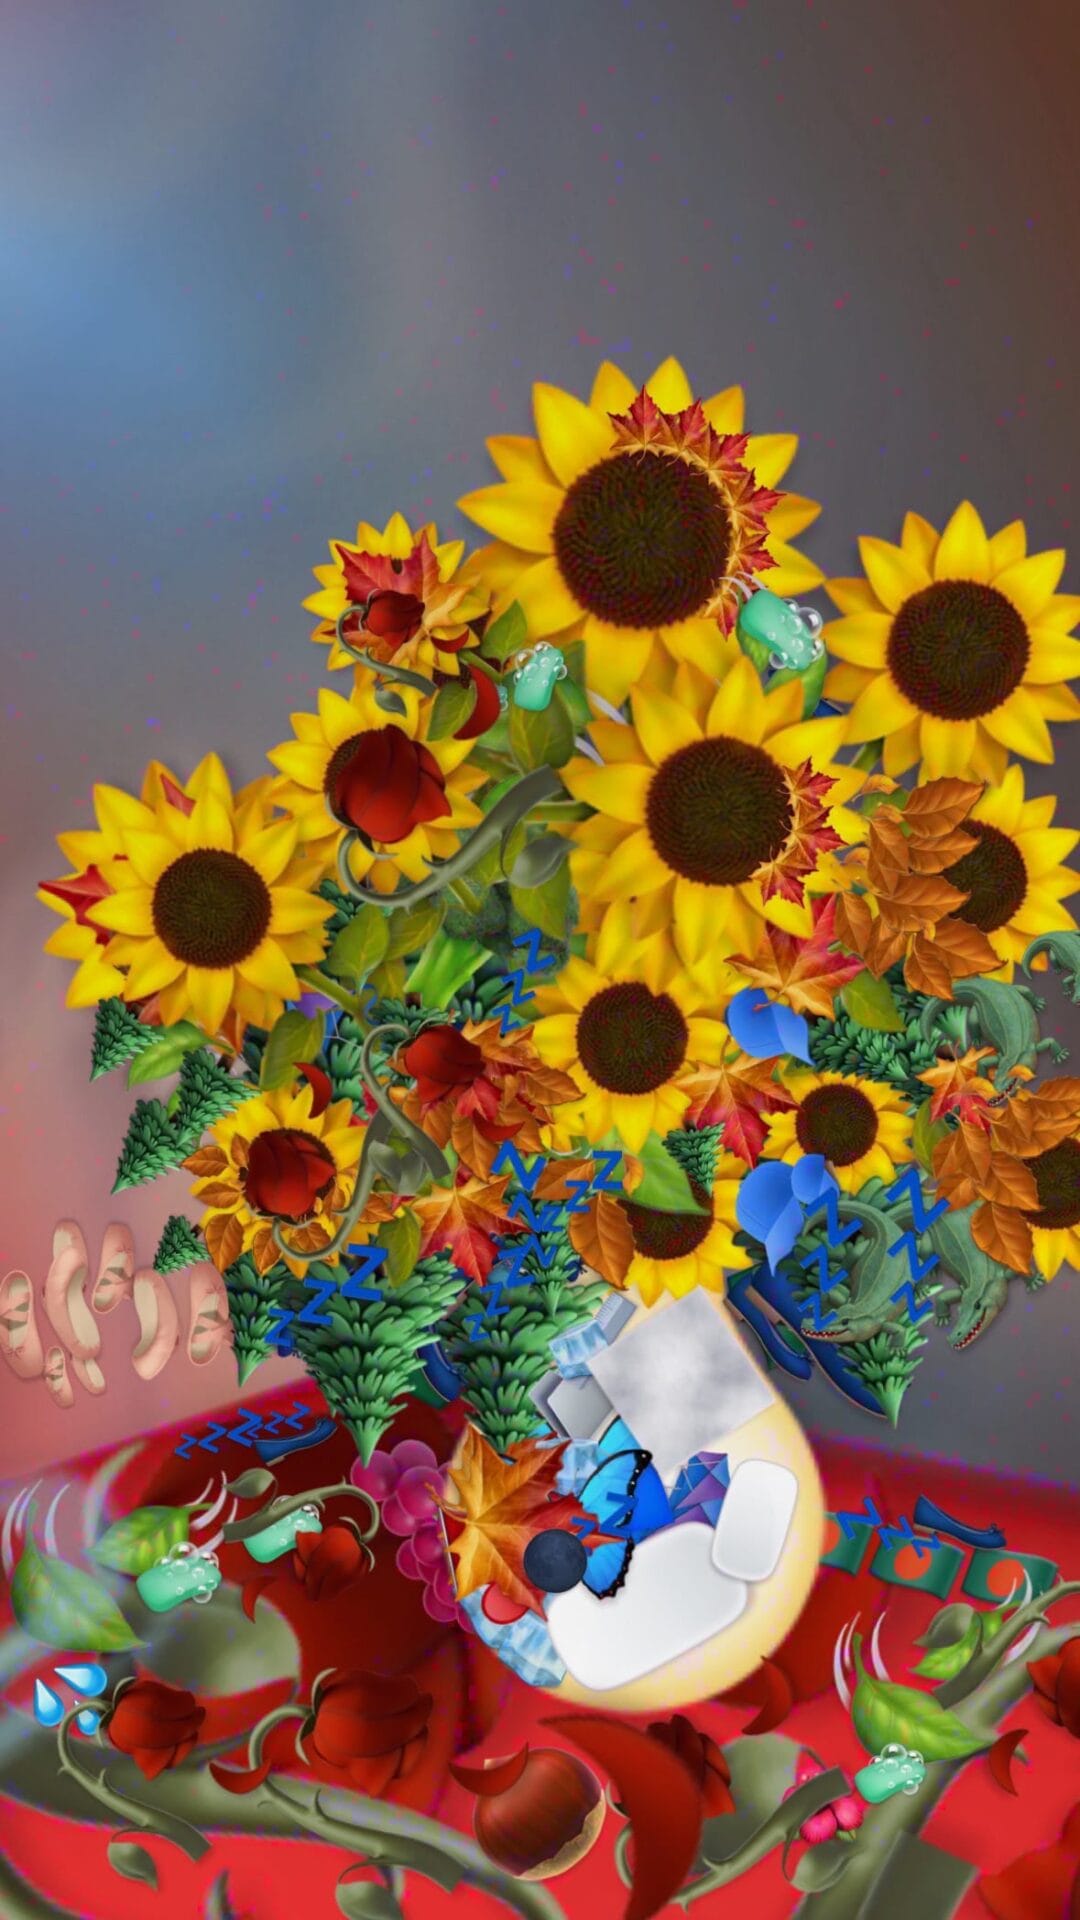 a still life of sunflowers made of emojis